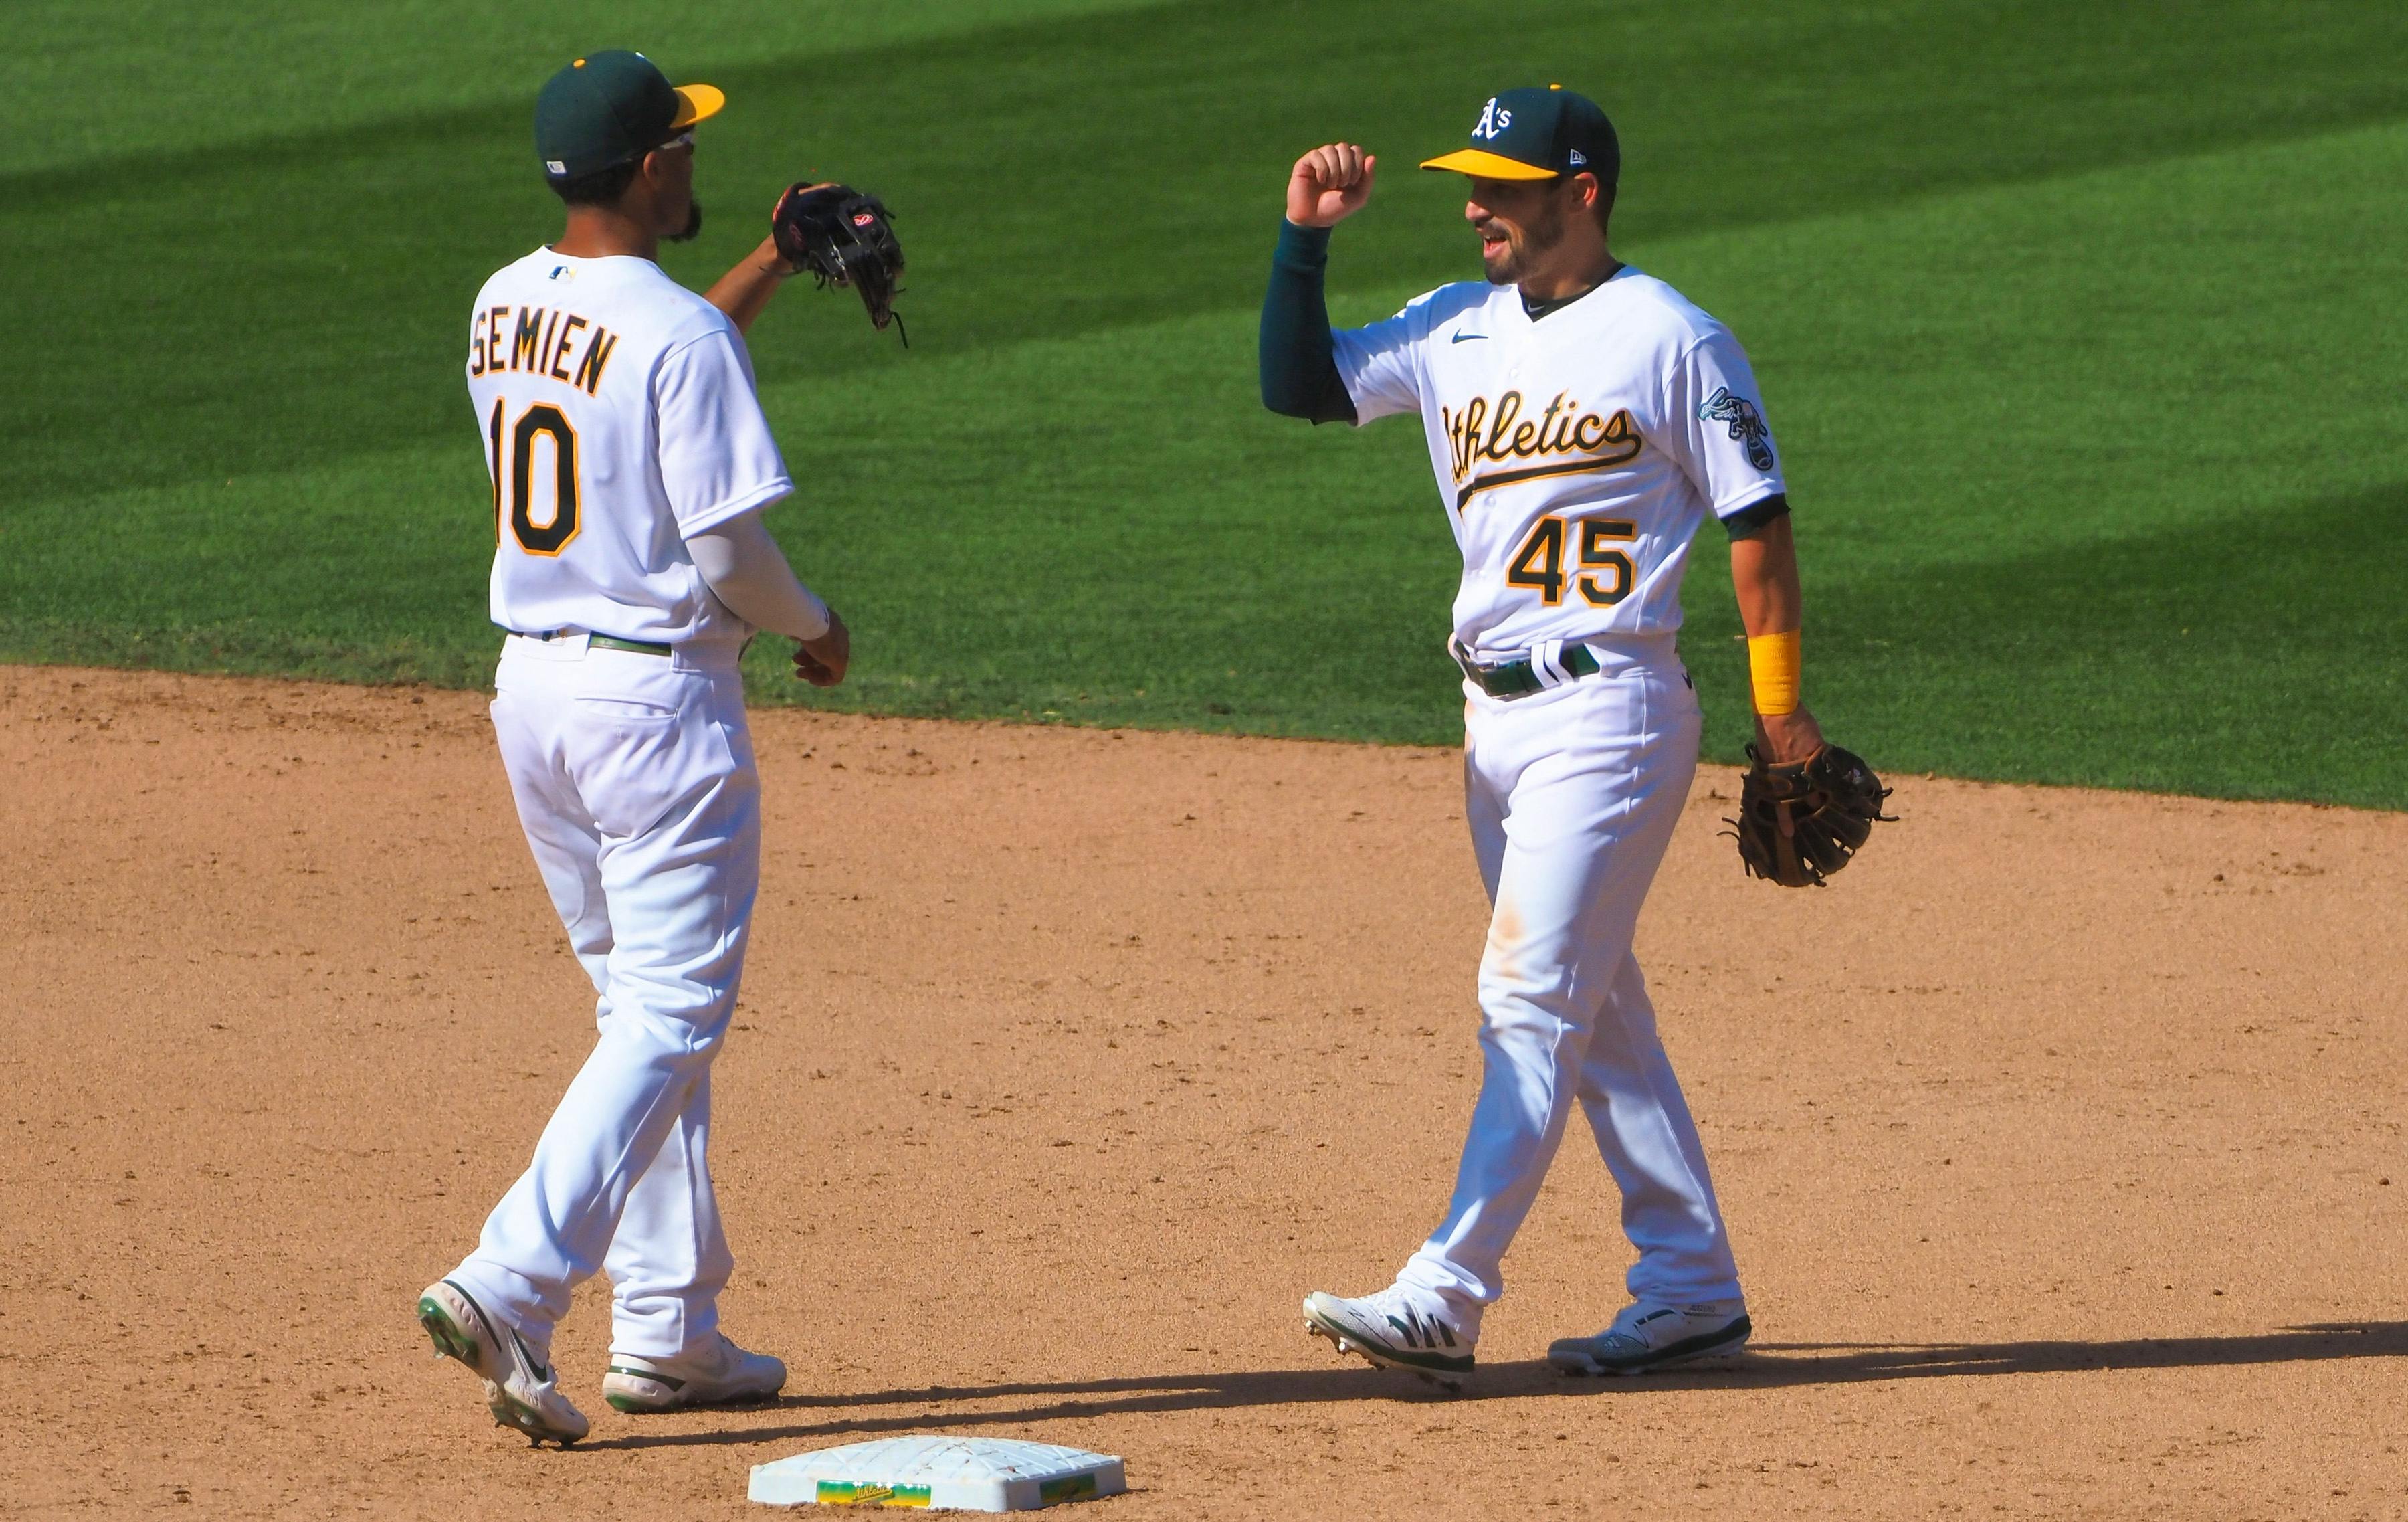 Lamb, Canha guide playoff-bound A's past Mariners